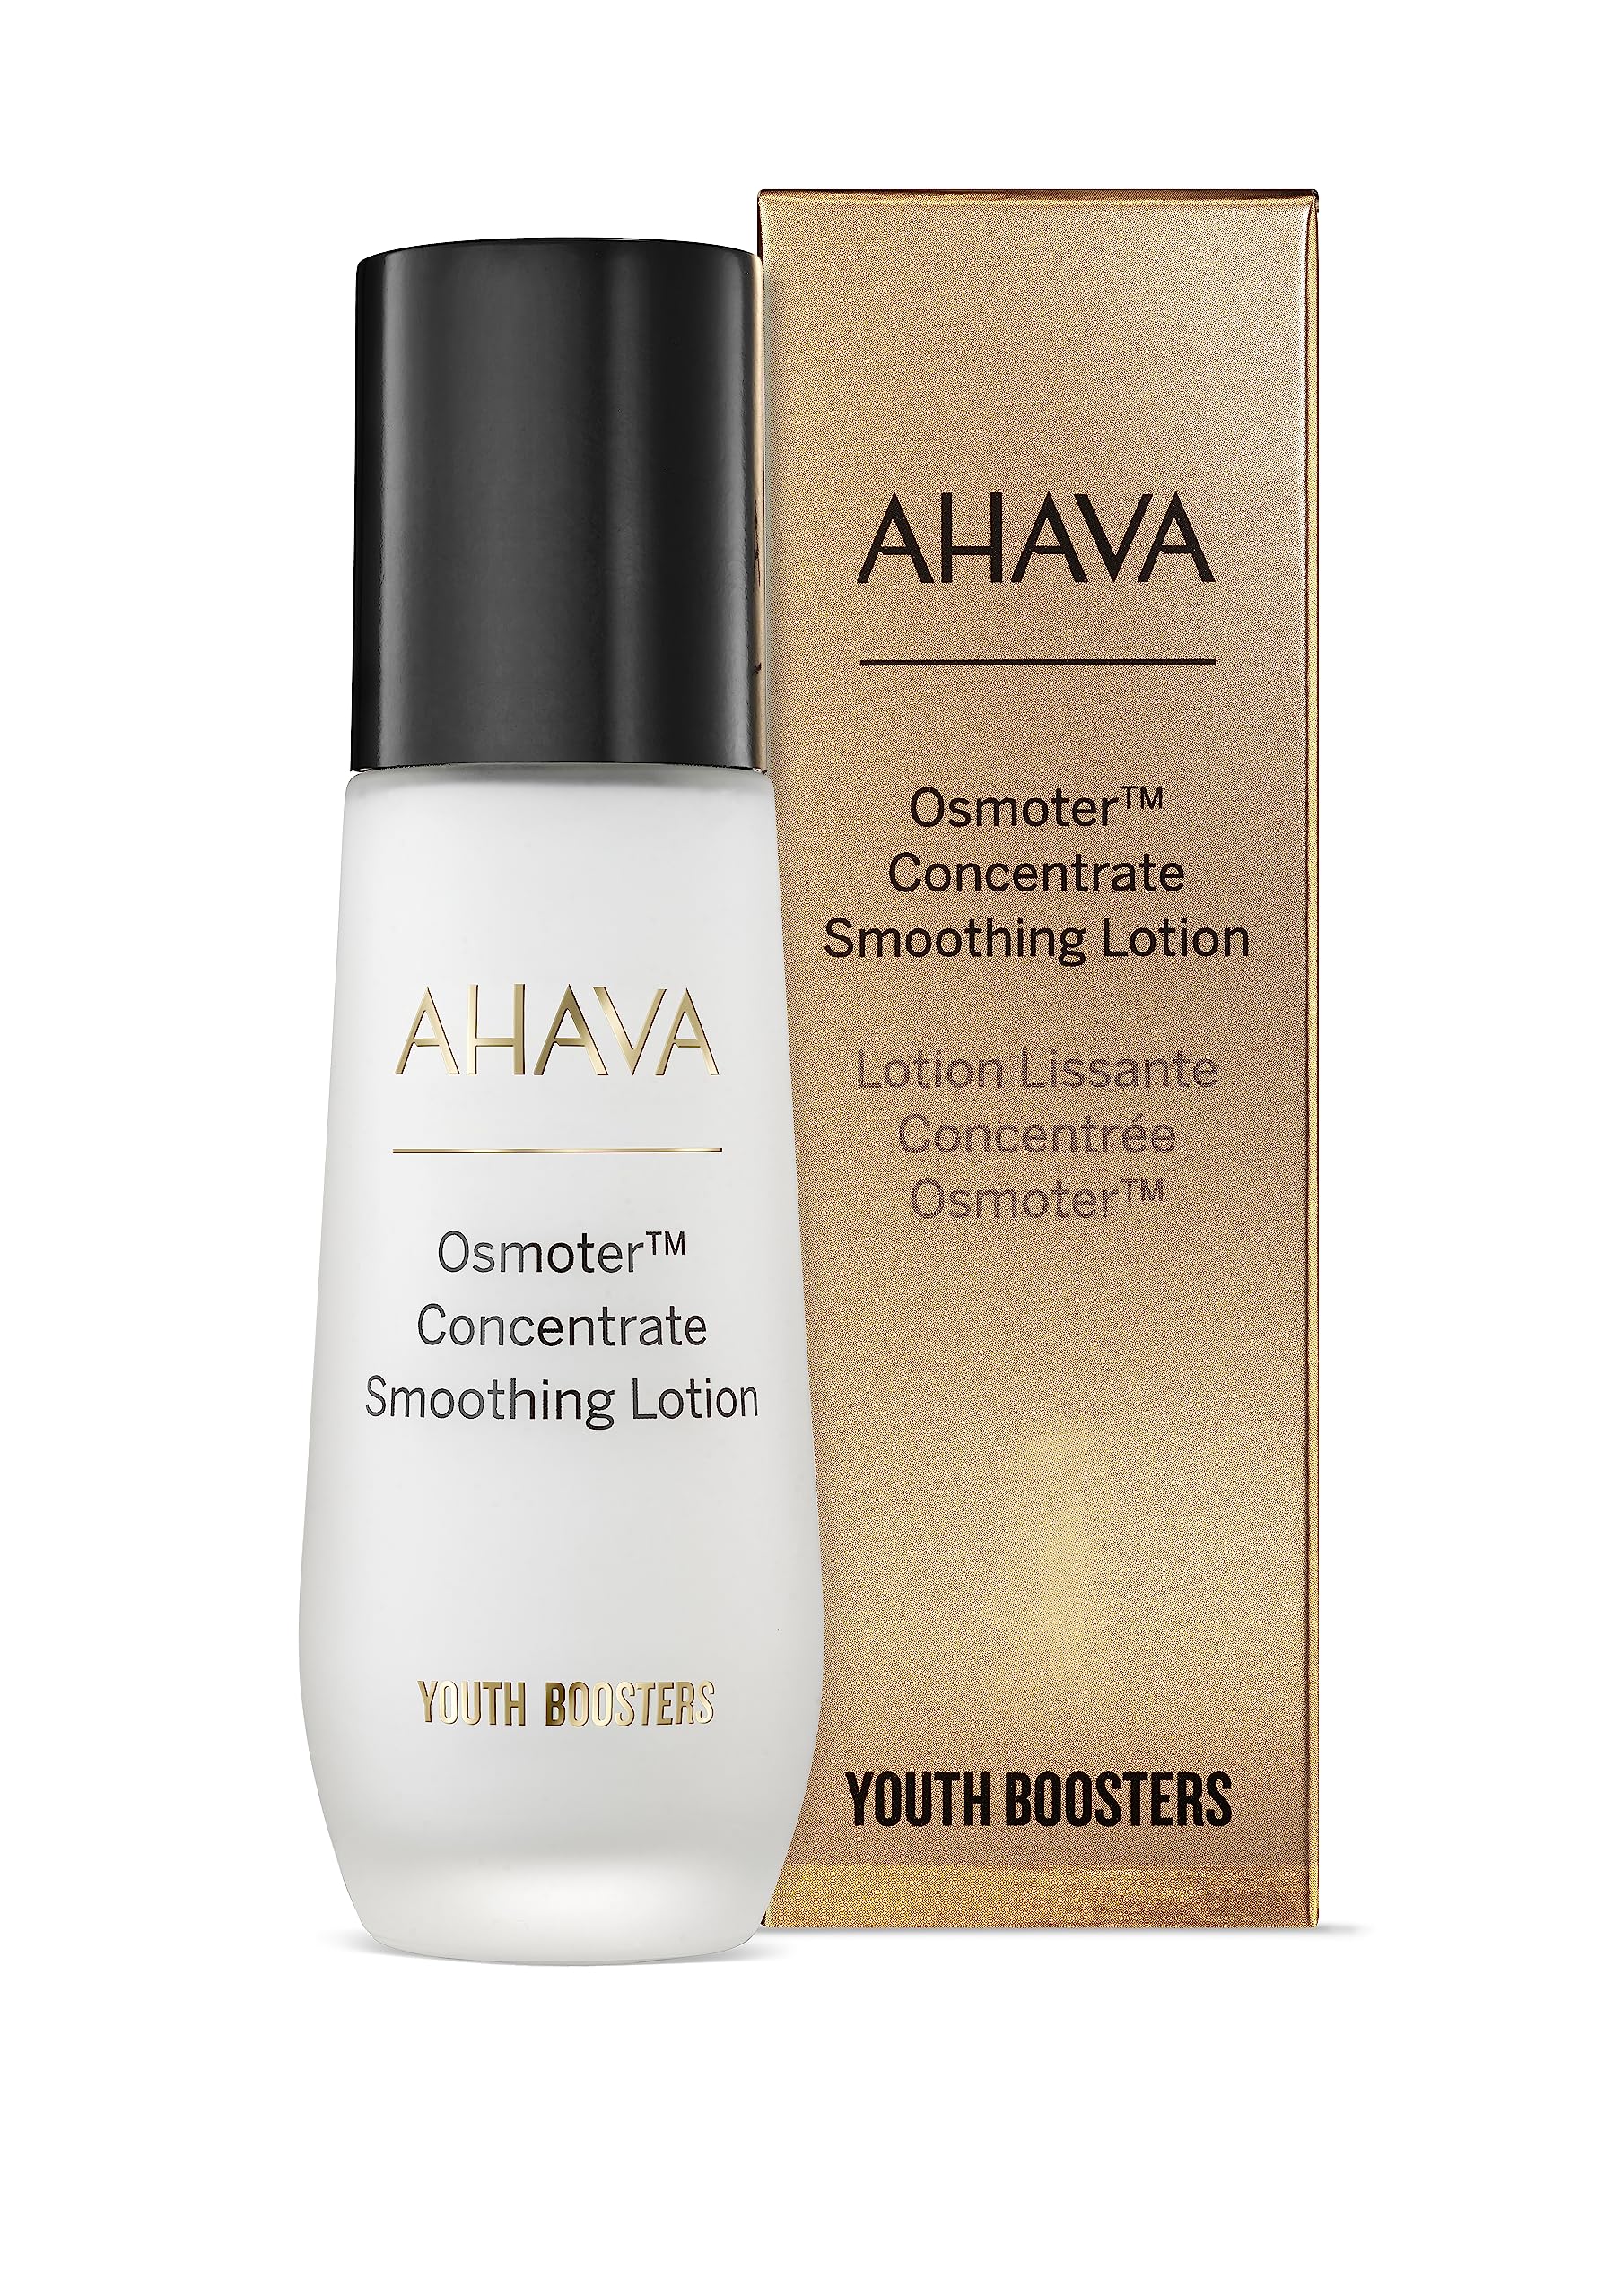 AHAVA Osmoter™ Concentrate Smoothing Lotion